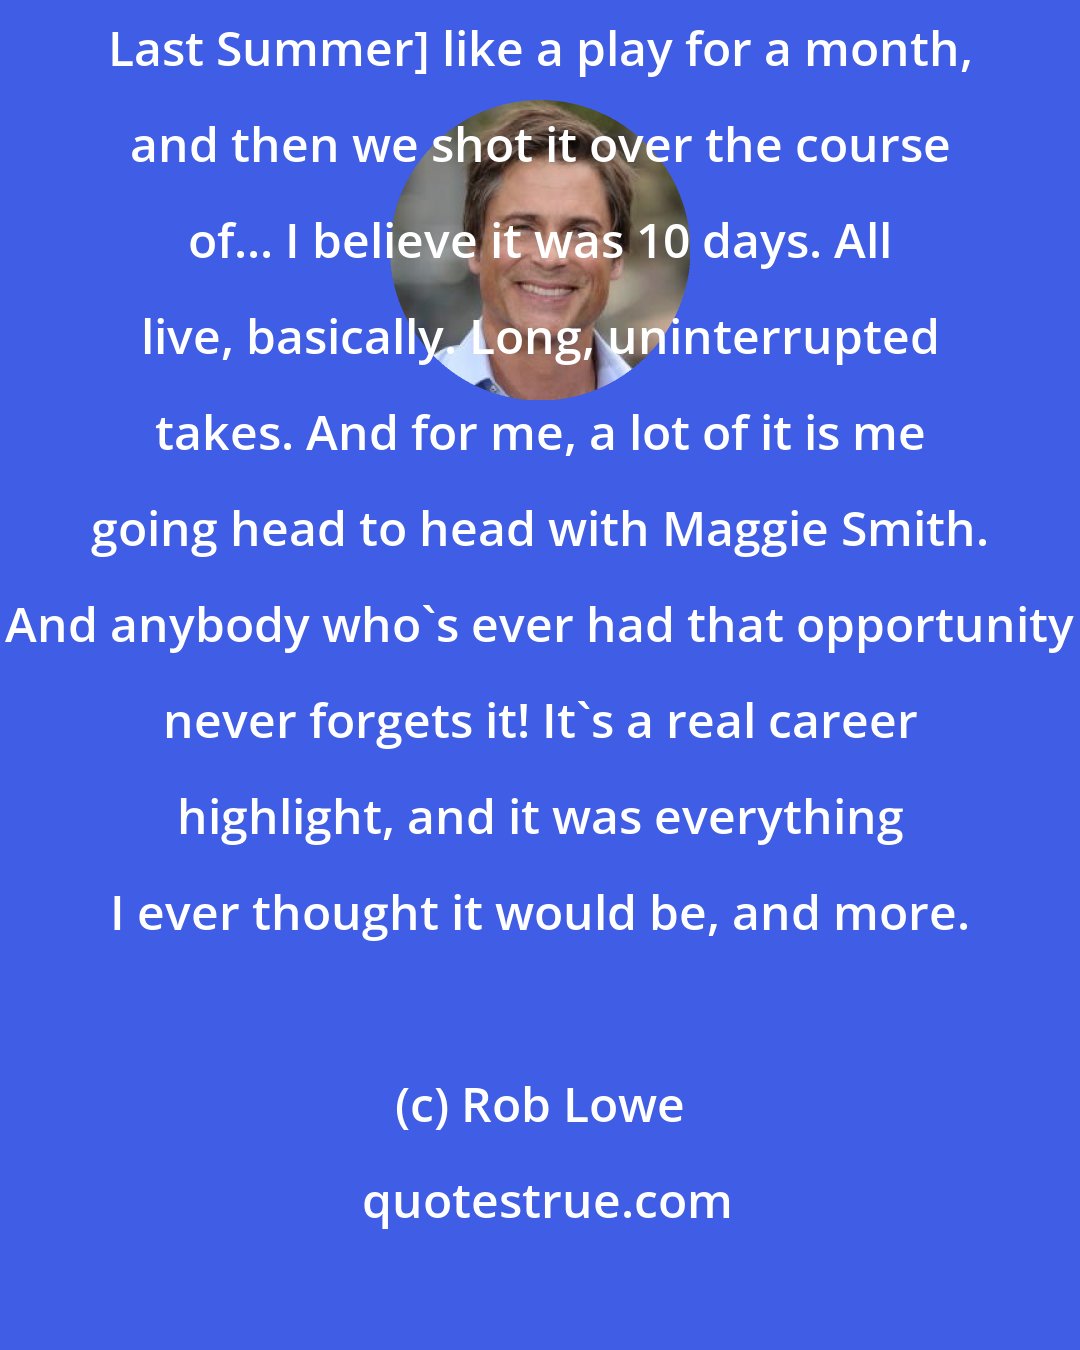 Rob Lowe: We [me,Maggie Smith and Natasha Richardson ] rehearsed [Suddenly, Last Summer] like a play for a month, and then we shot it over the course of... I believe it was 10 days. All live, basically. Long, uninterrupted takes. And for me, a lot of it is me going head to head with Maggie Smith. And anybody who's ever had that opportunity never forgets it! It's a real career highlight, and it was everything I ever thought it would be, and more.